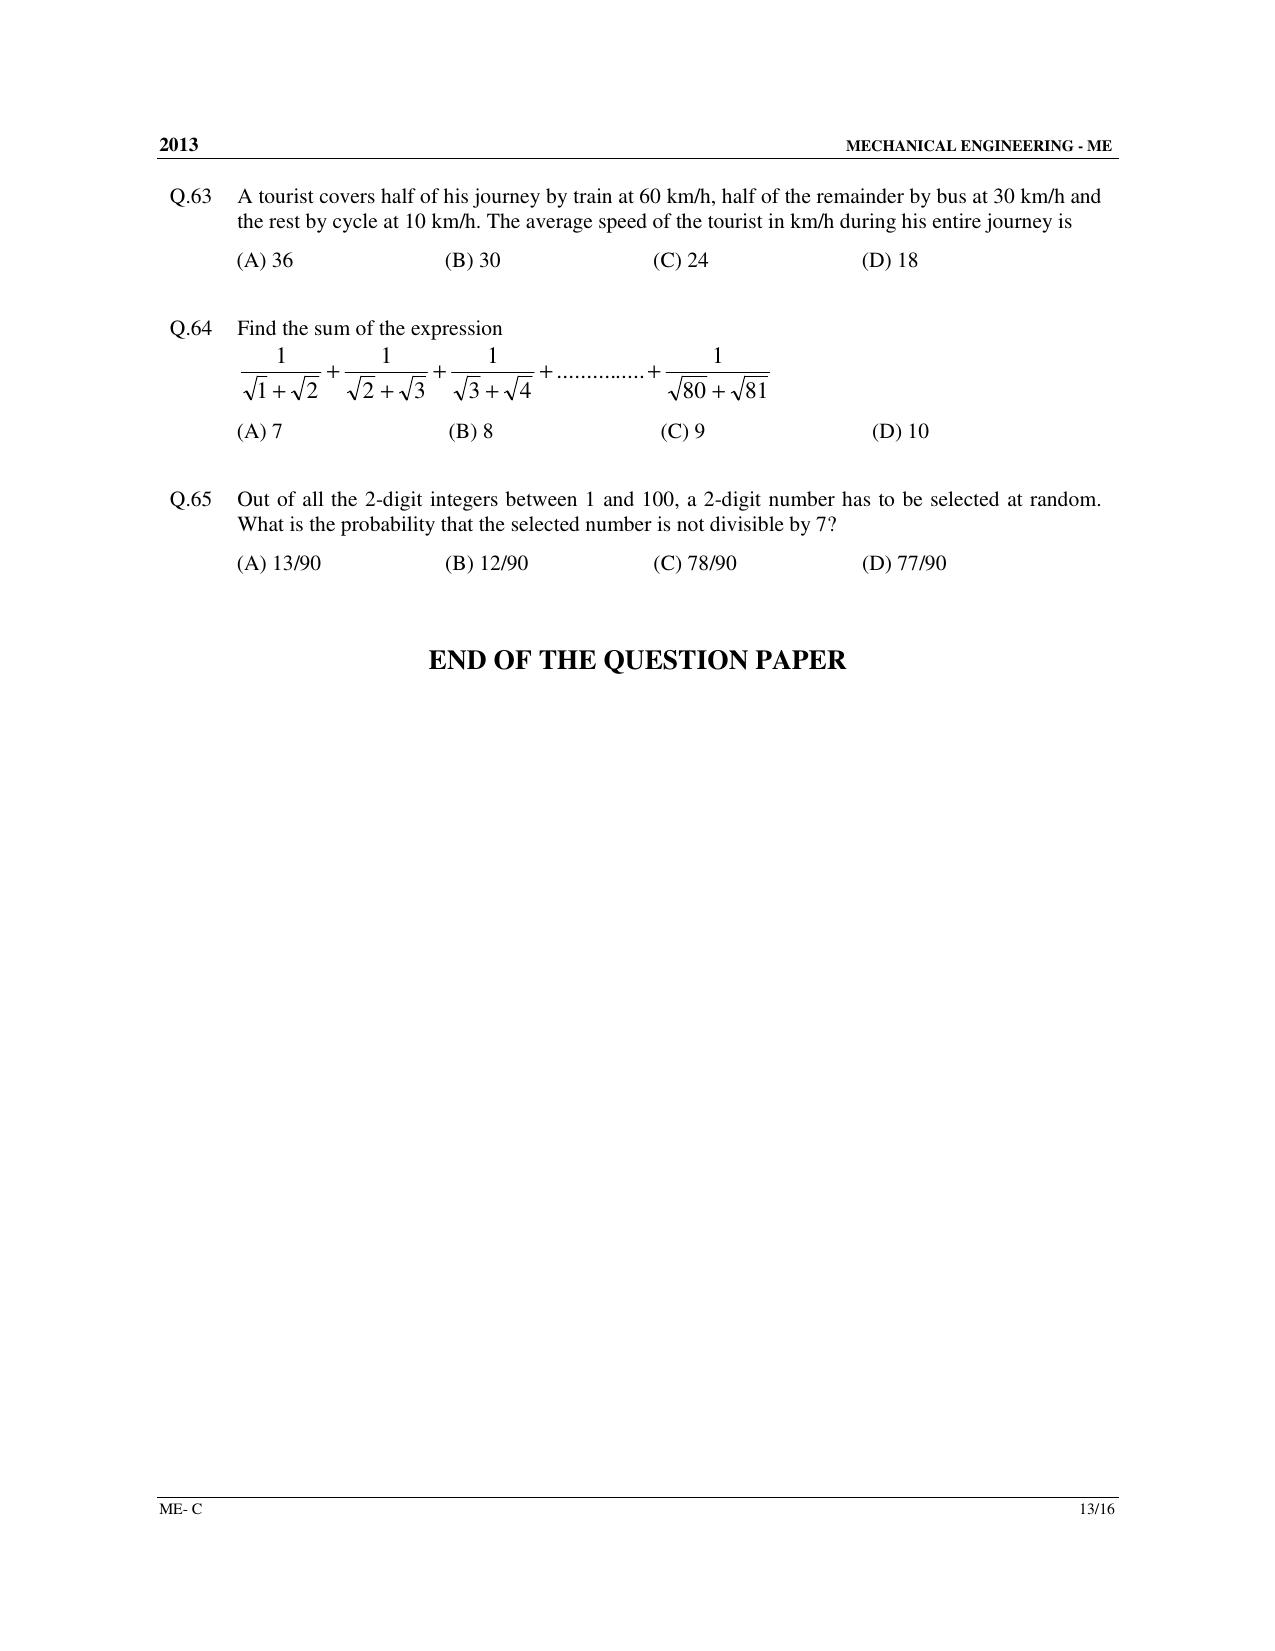 GATE 2013 Mechanical Engineering (ME) Question Paper with Answer Key - Page 42